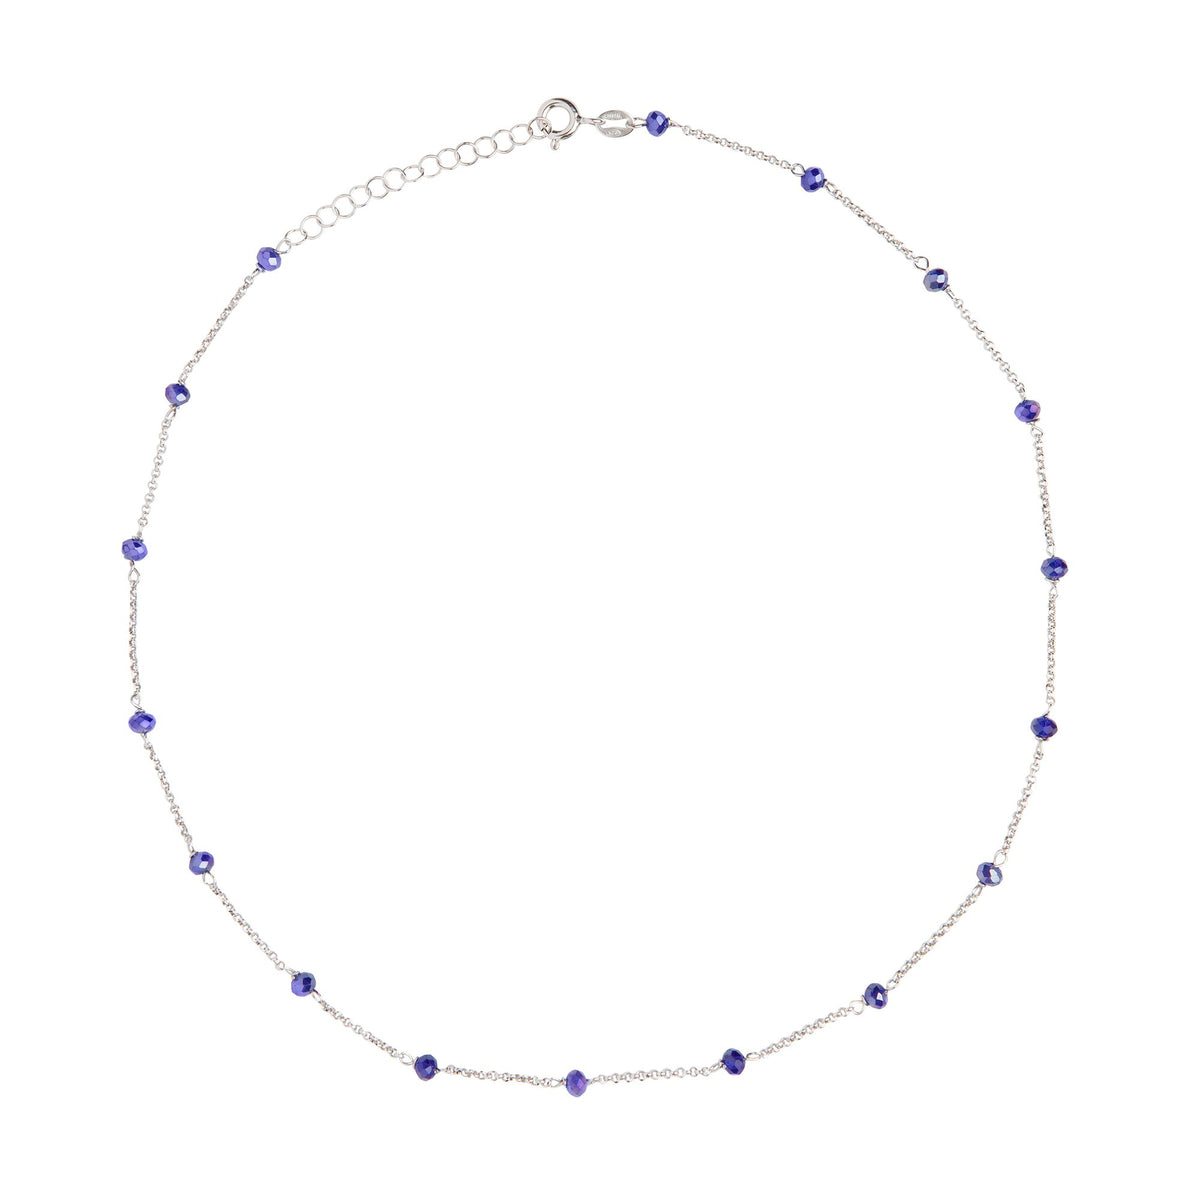 SILVER AND BLUE STONES NECKLACE